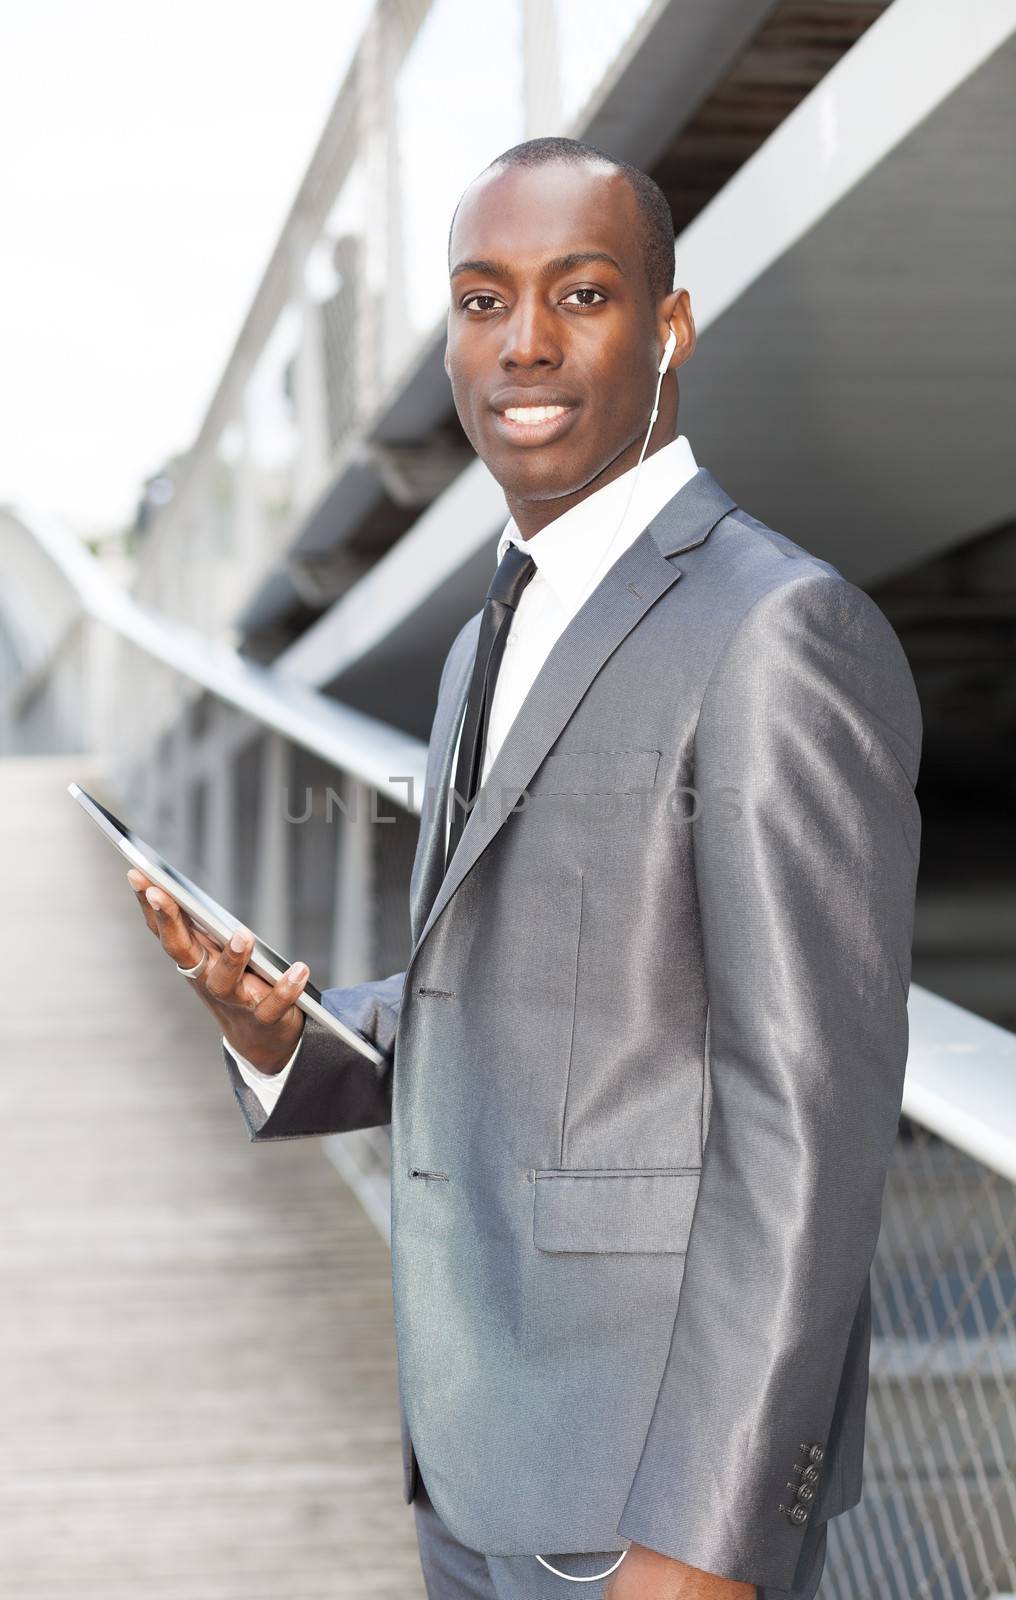 Portrait of a businessman with hands-free headset and using electronic tablet